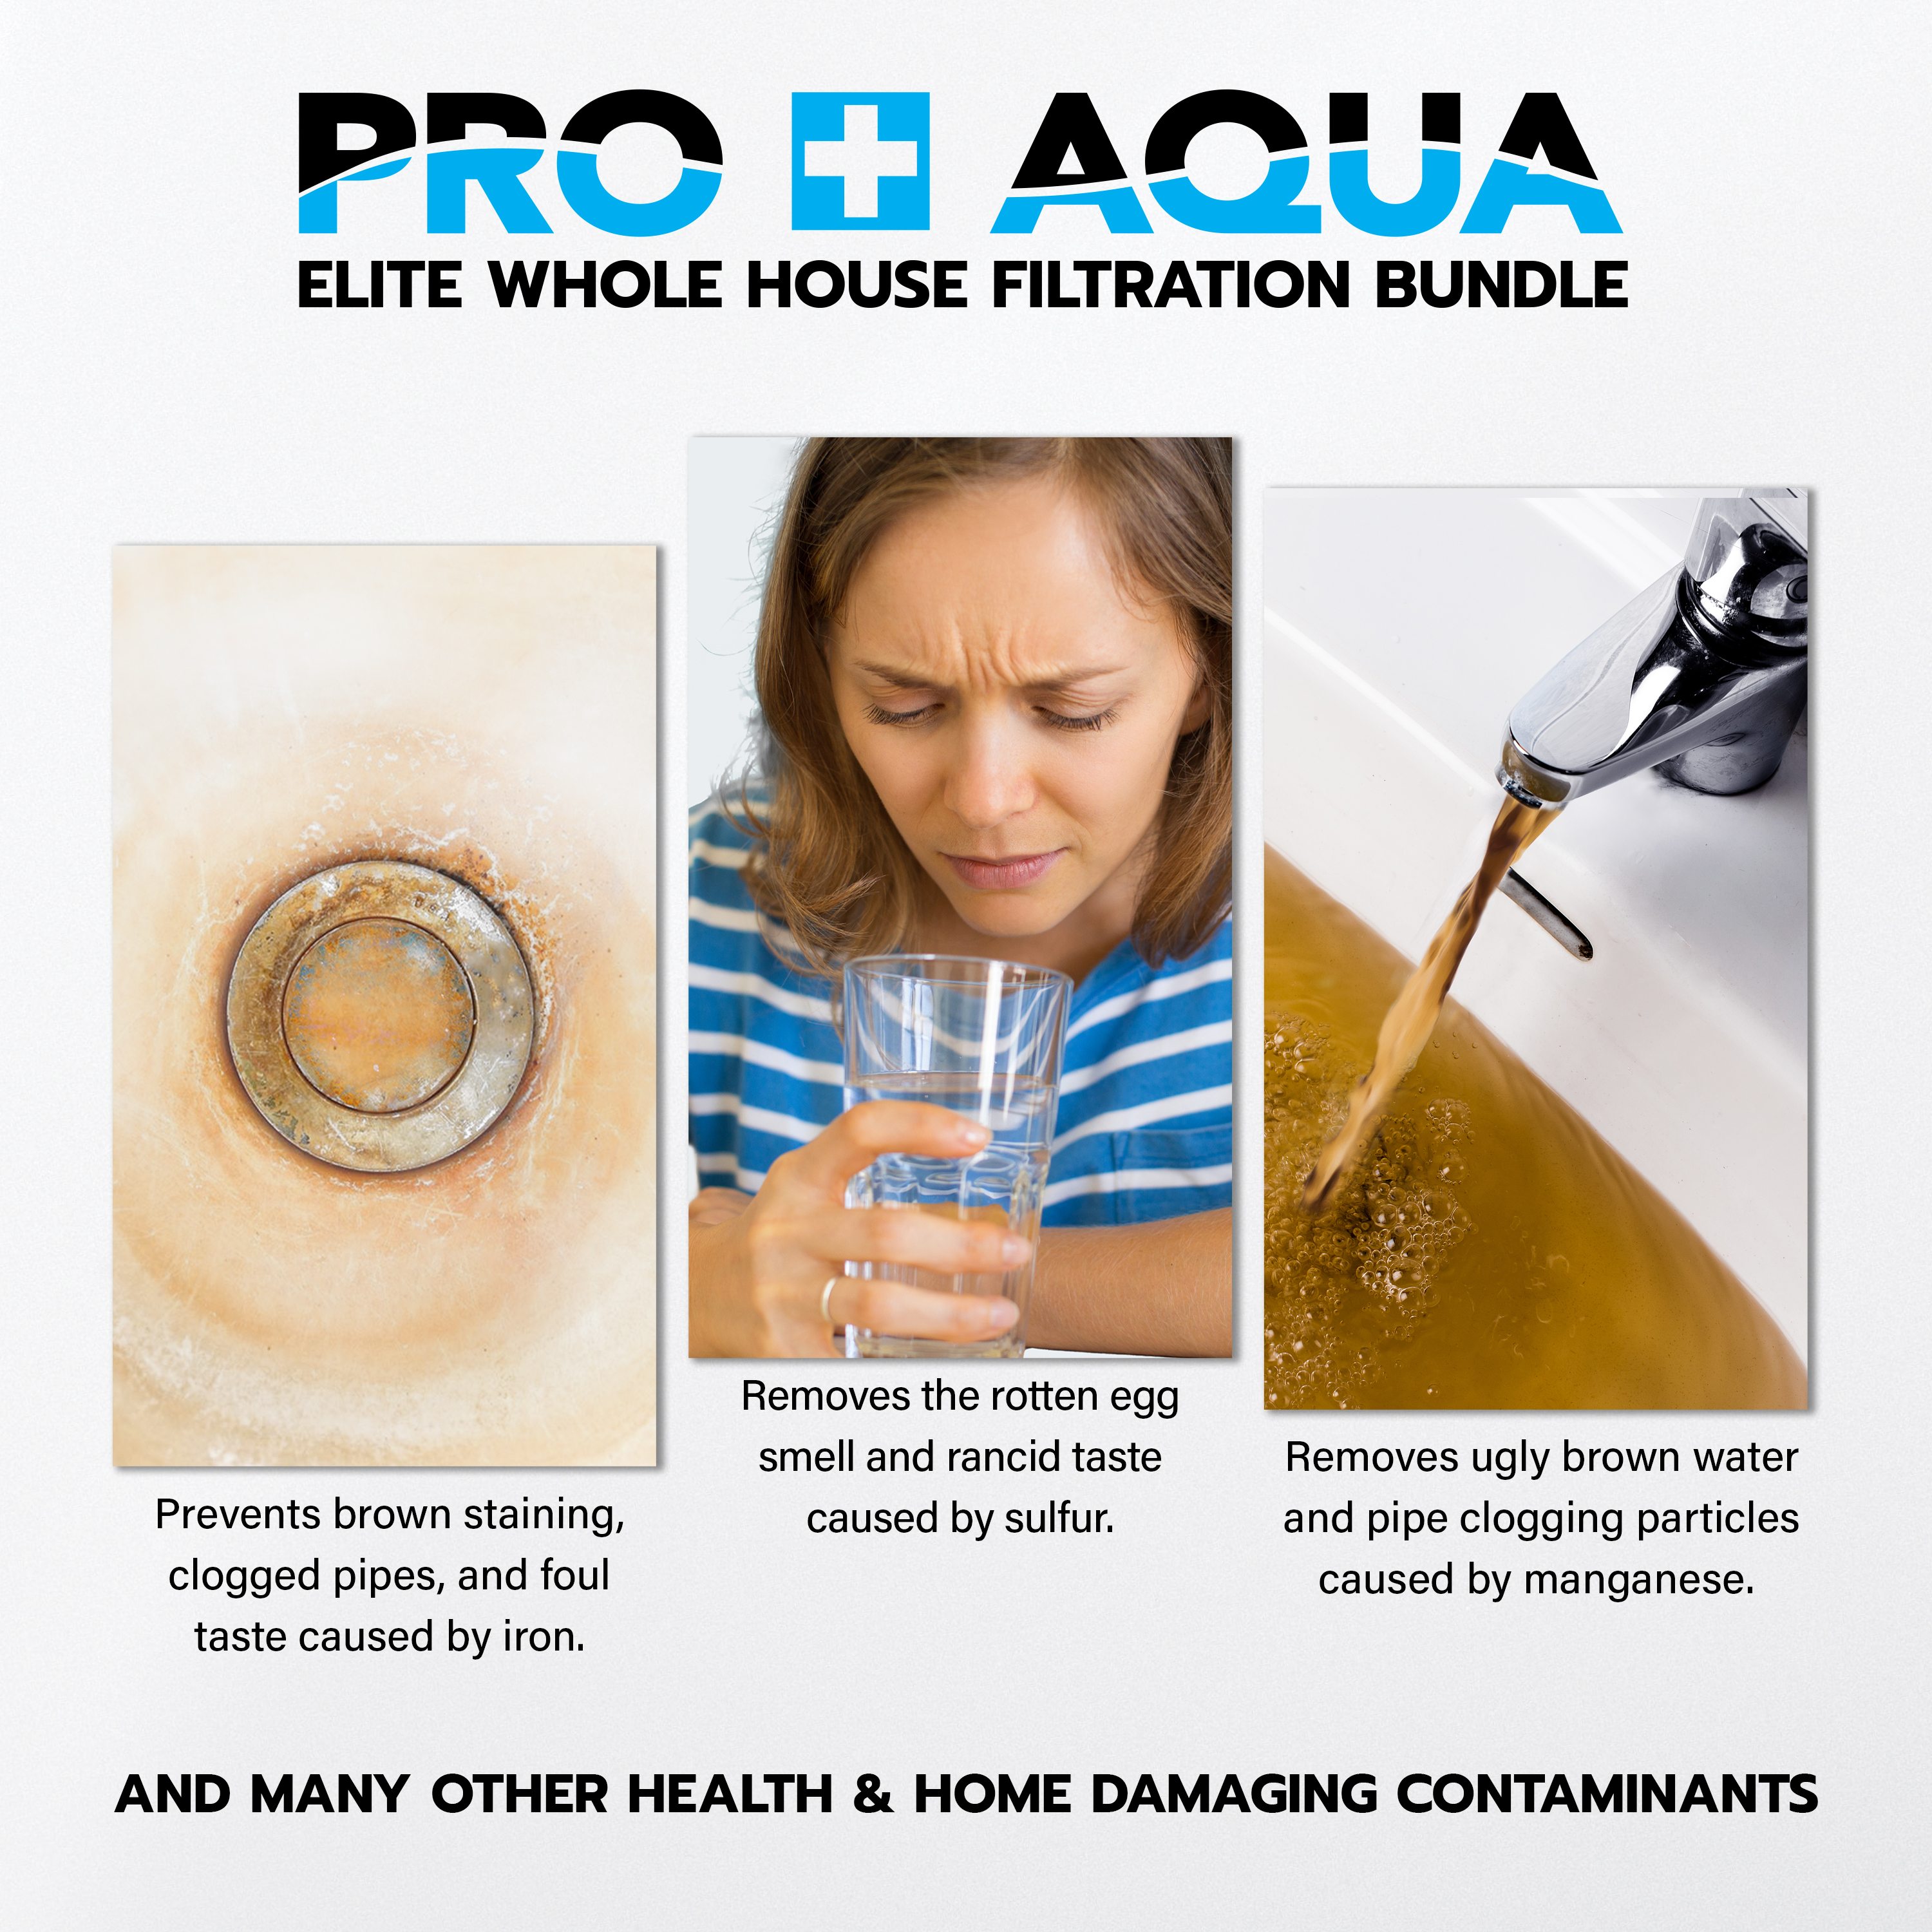 PRO+AQUA ELITE Whole House Well Water Filter System and Water Softener Bundle - Remove Iron, Sulfur, Sediment, and more